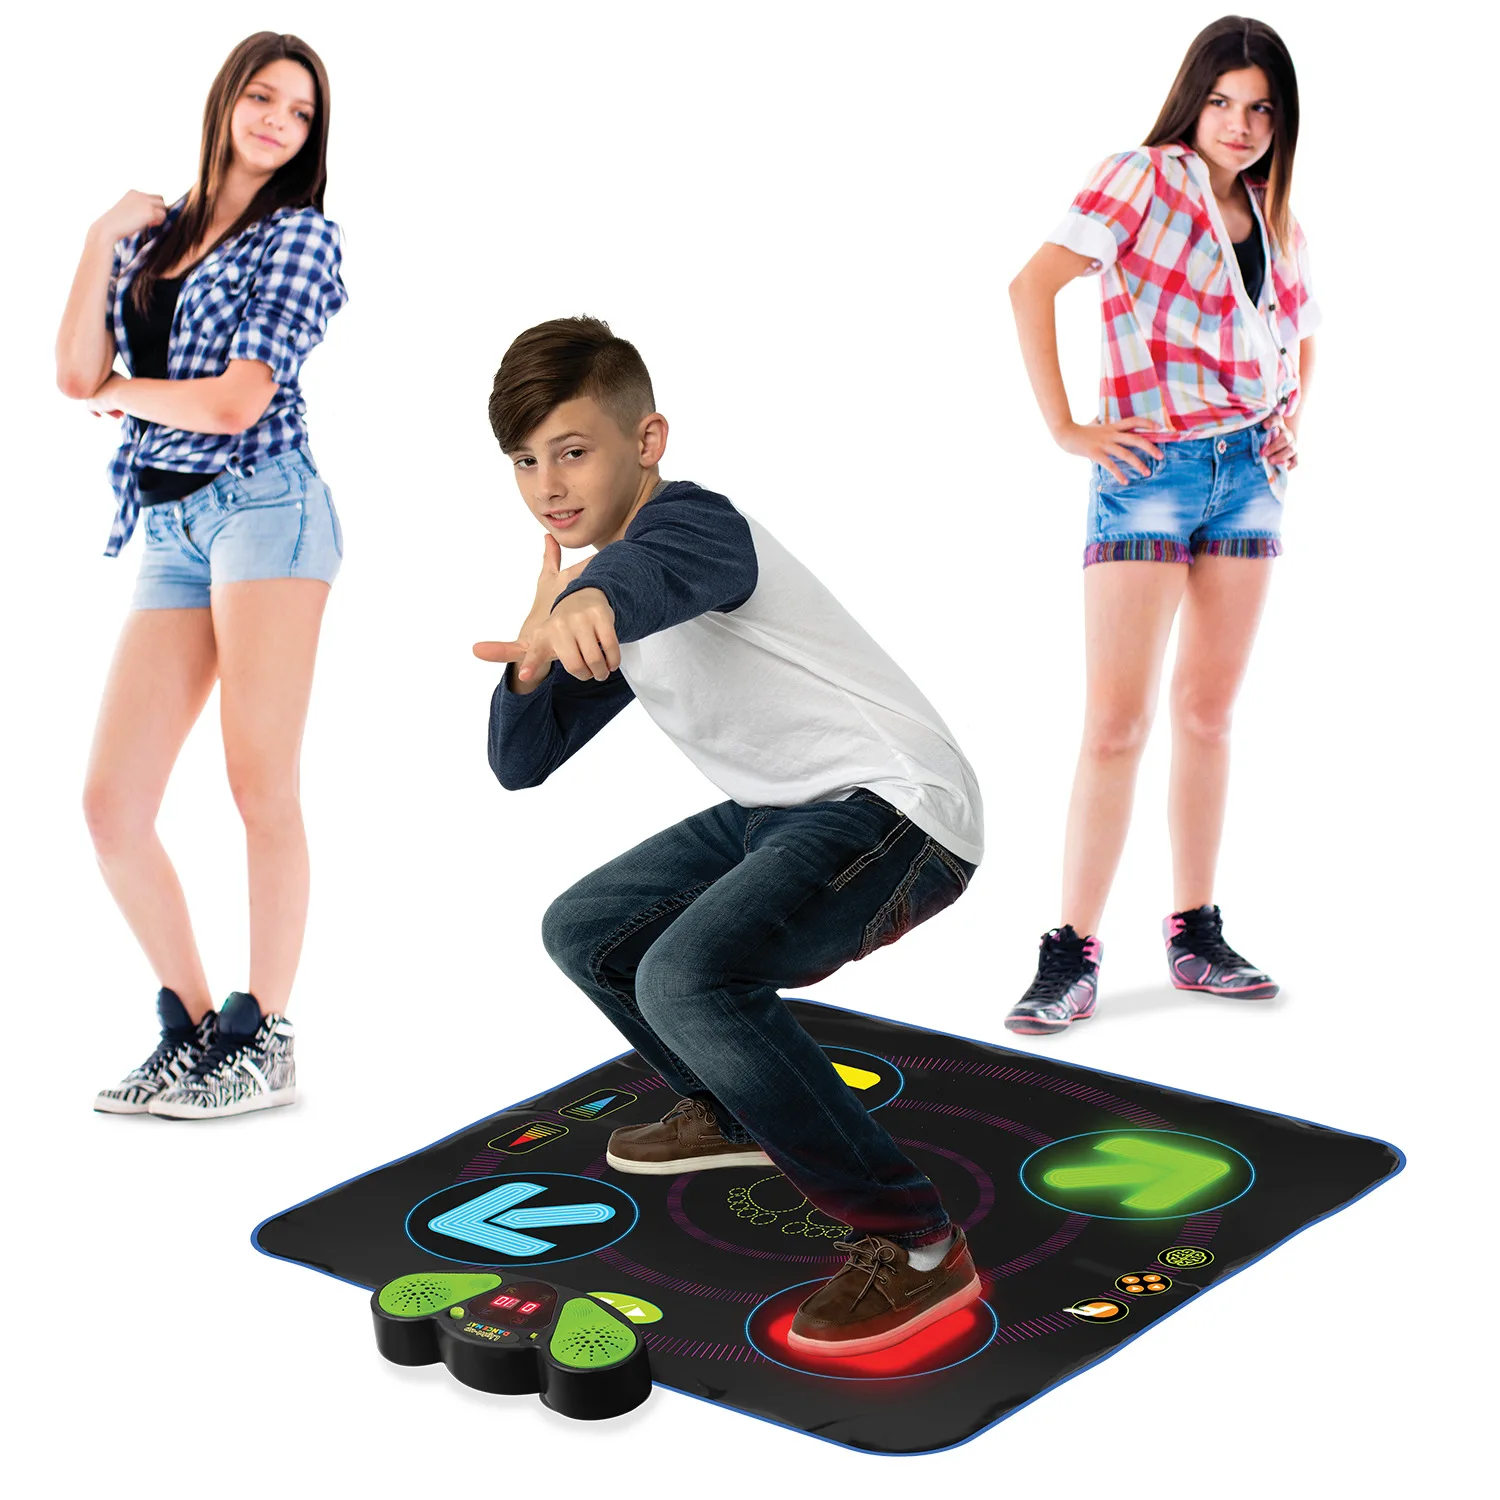 

Wholesale Light dance mat with built-in music and dance games, with 4 game modes, gift toys for 6-year-old girls and boys